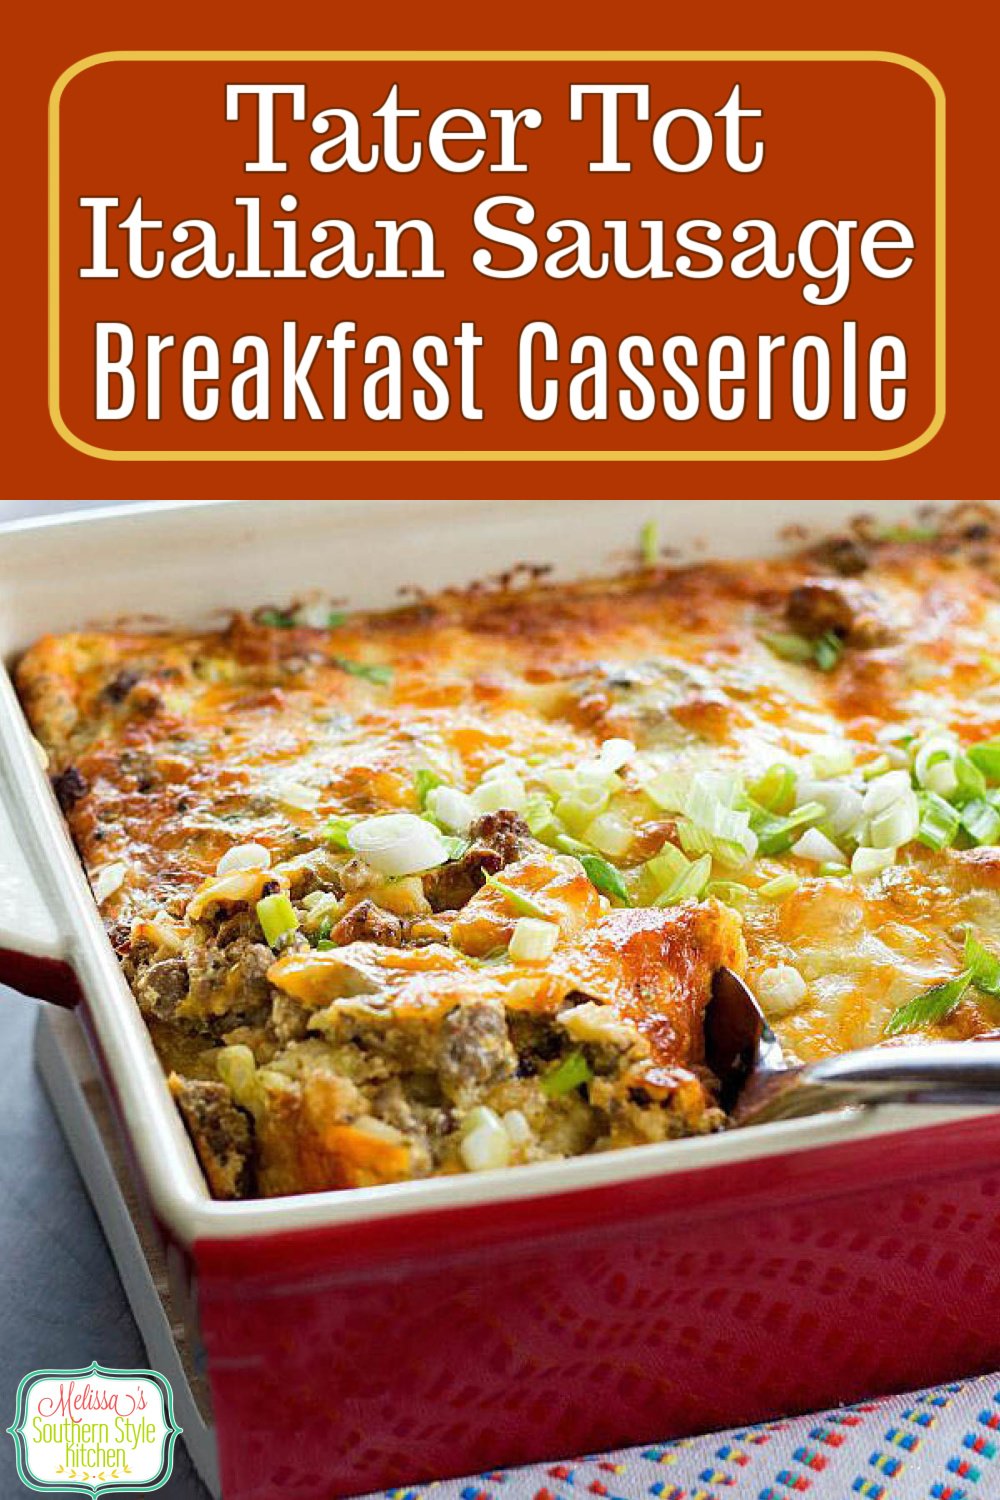 Start your day with this cheesy and delicious Tater Tot Italian Sausage Breakfast Casserole #tatertotcasserole #breakfastcasseroles #sausage #italiansausage #overnightbreakfastcasserole #brunch #breakfast #southernfood #casseroles #southernrecipes #holidaybrunch #christmasrecipes #thanksgivingrecipes via @melissasssk